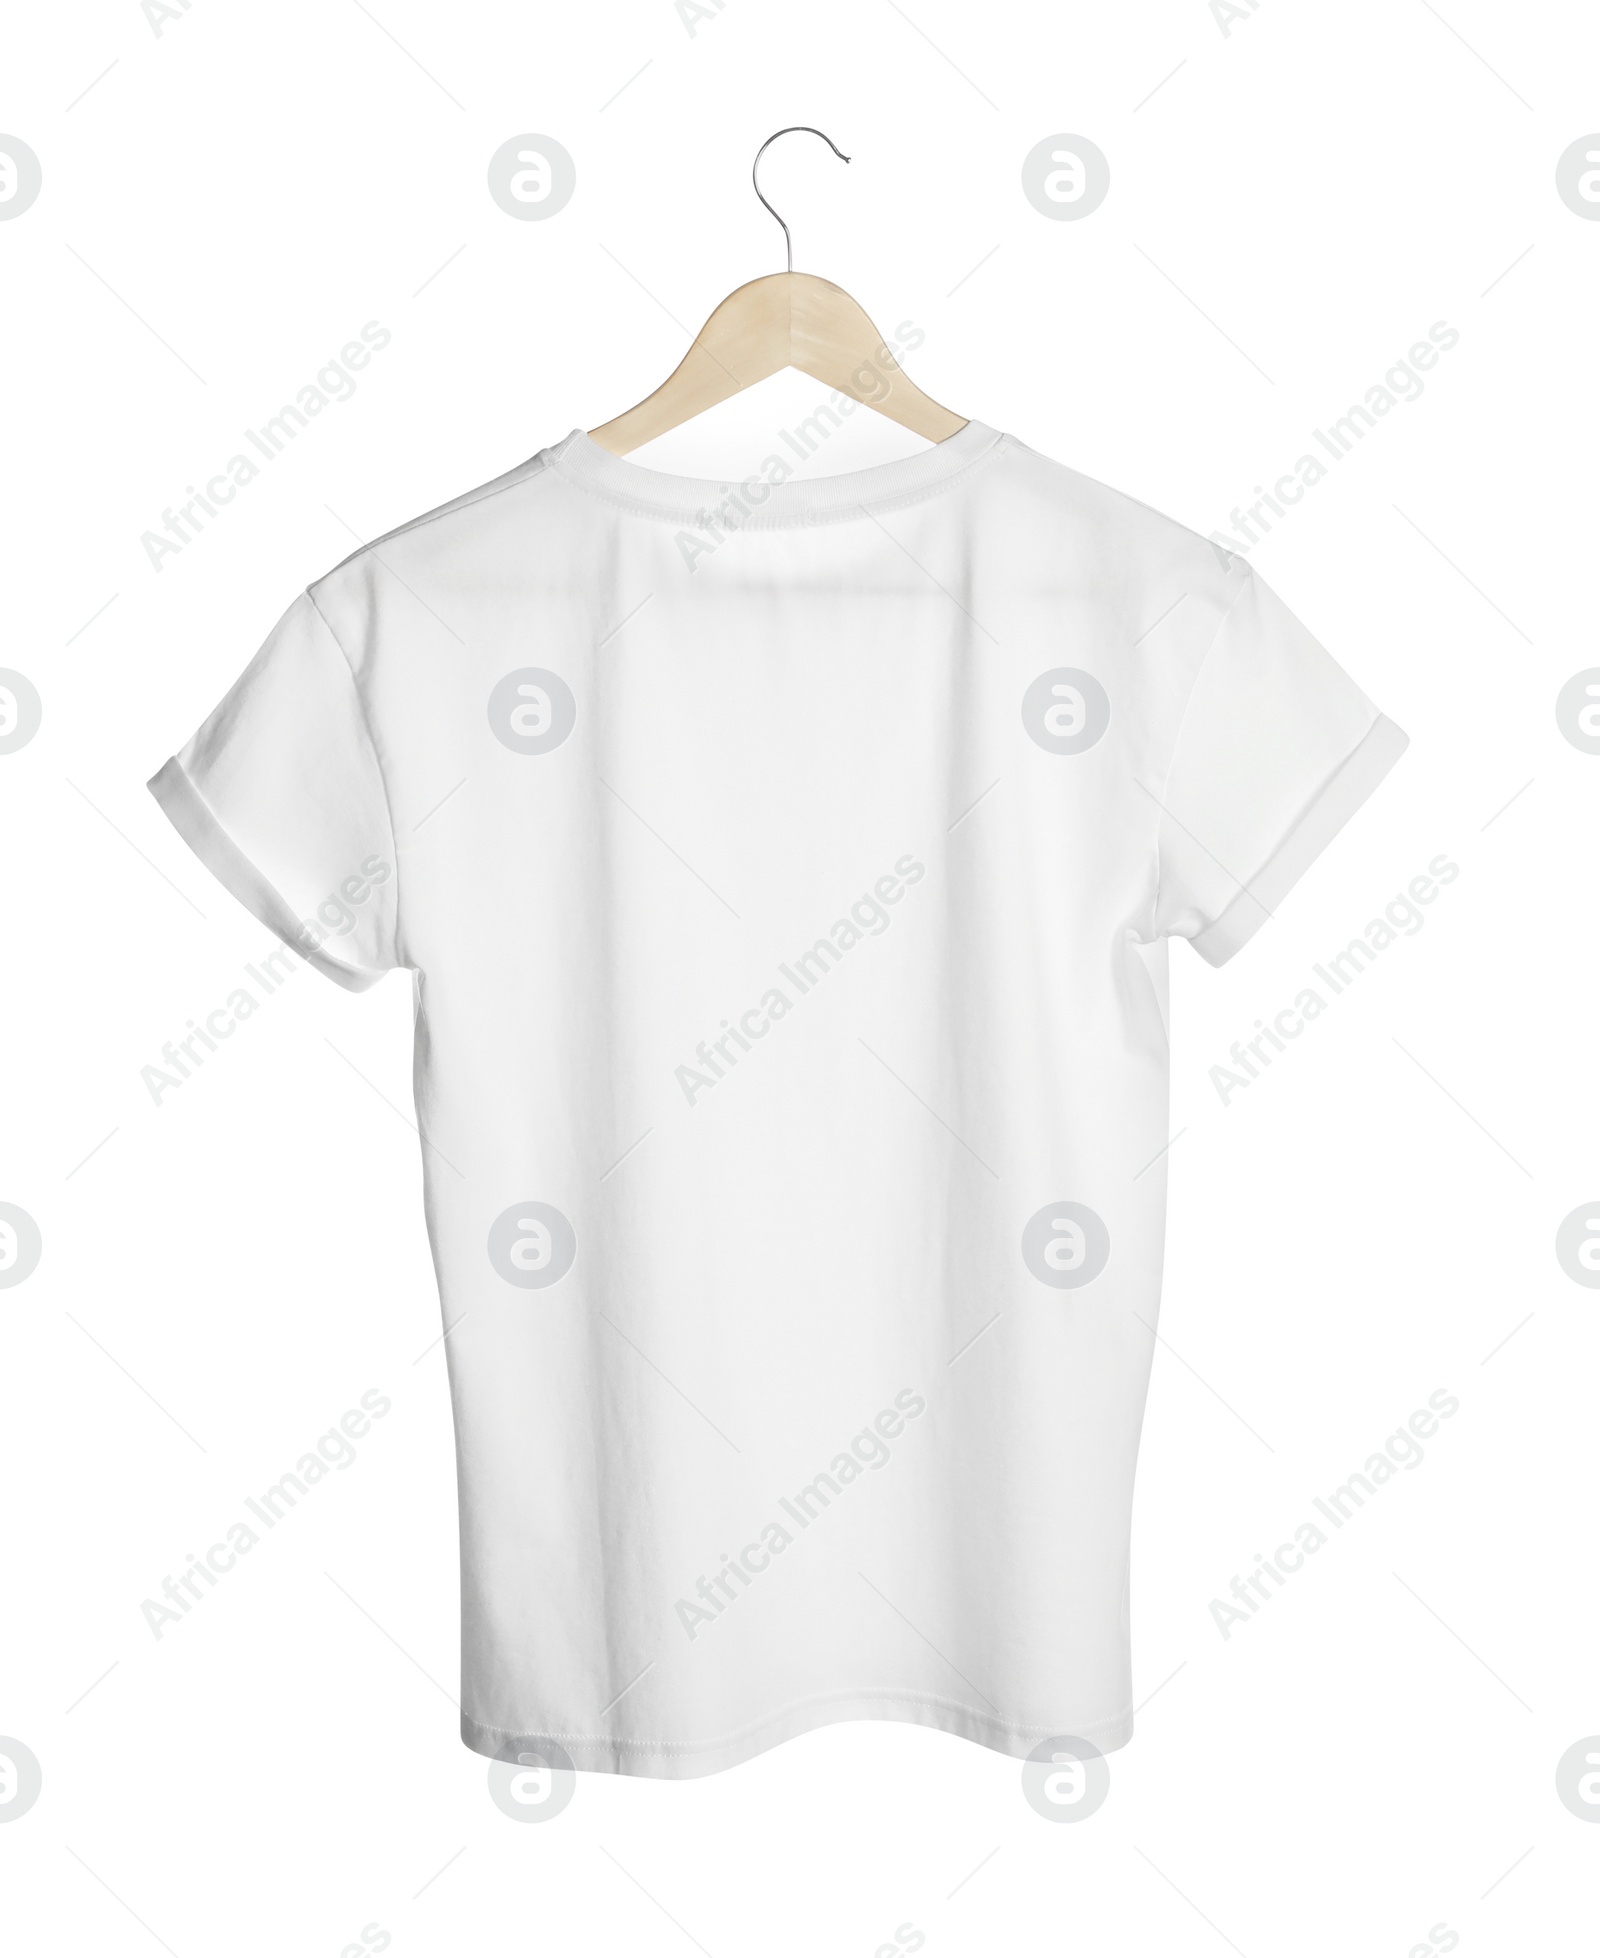 Photo of Hanger with stylish t-shirt on white background, back view